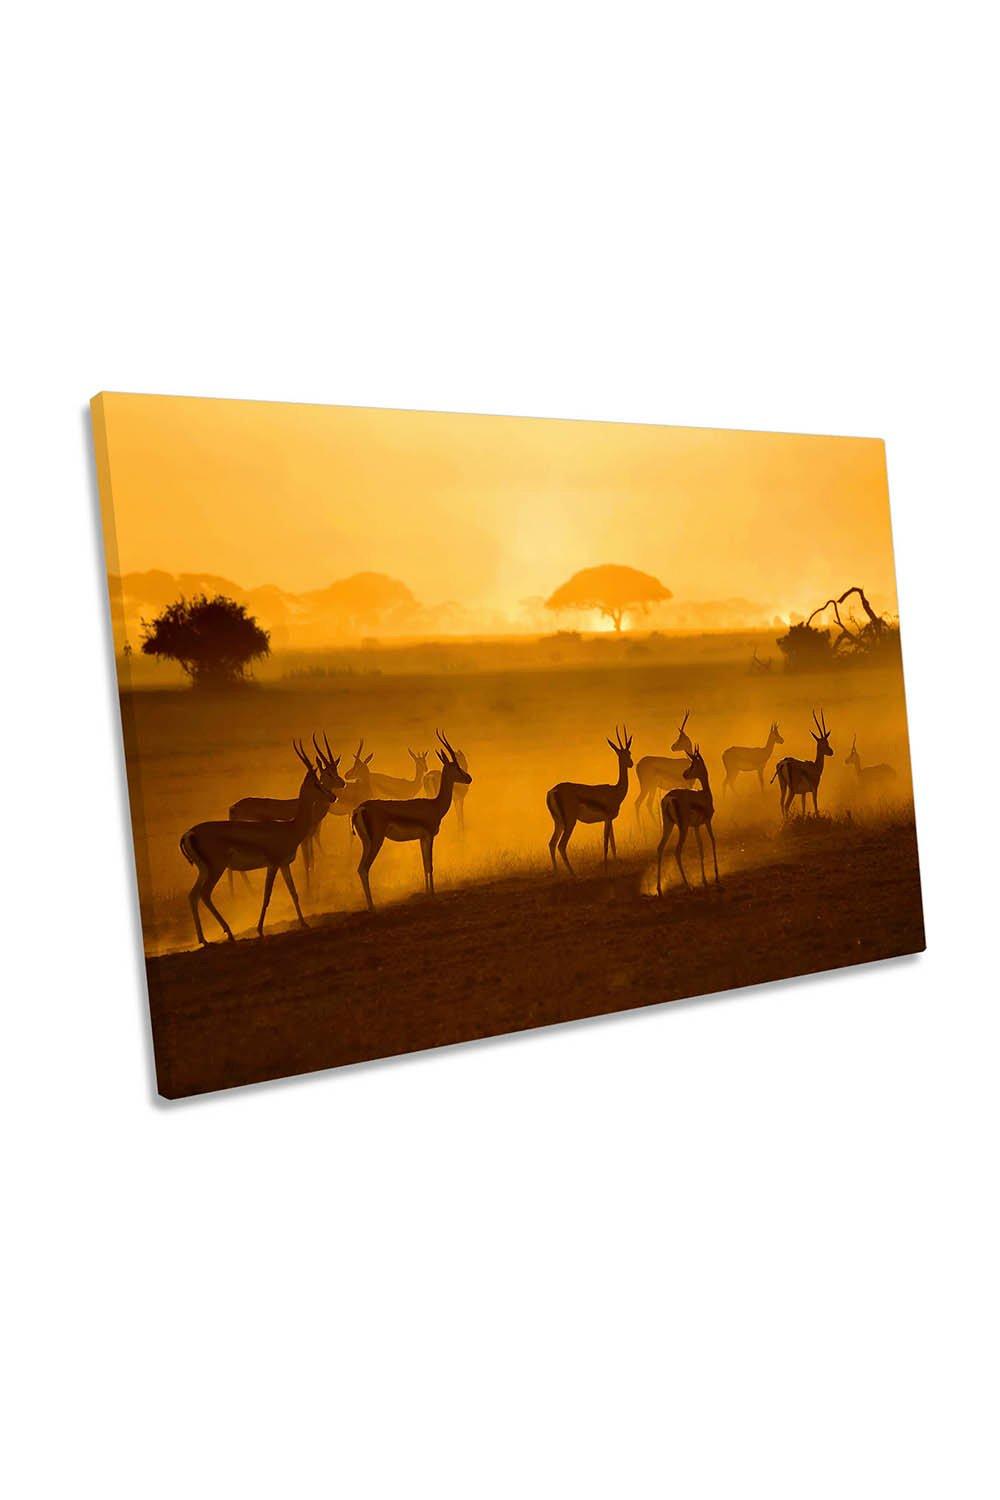 African Wildlife Sunset Nature Orange Canvas Wall Art Picture Print